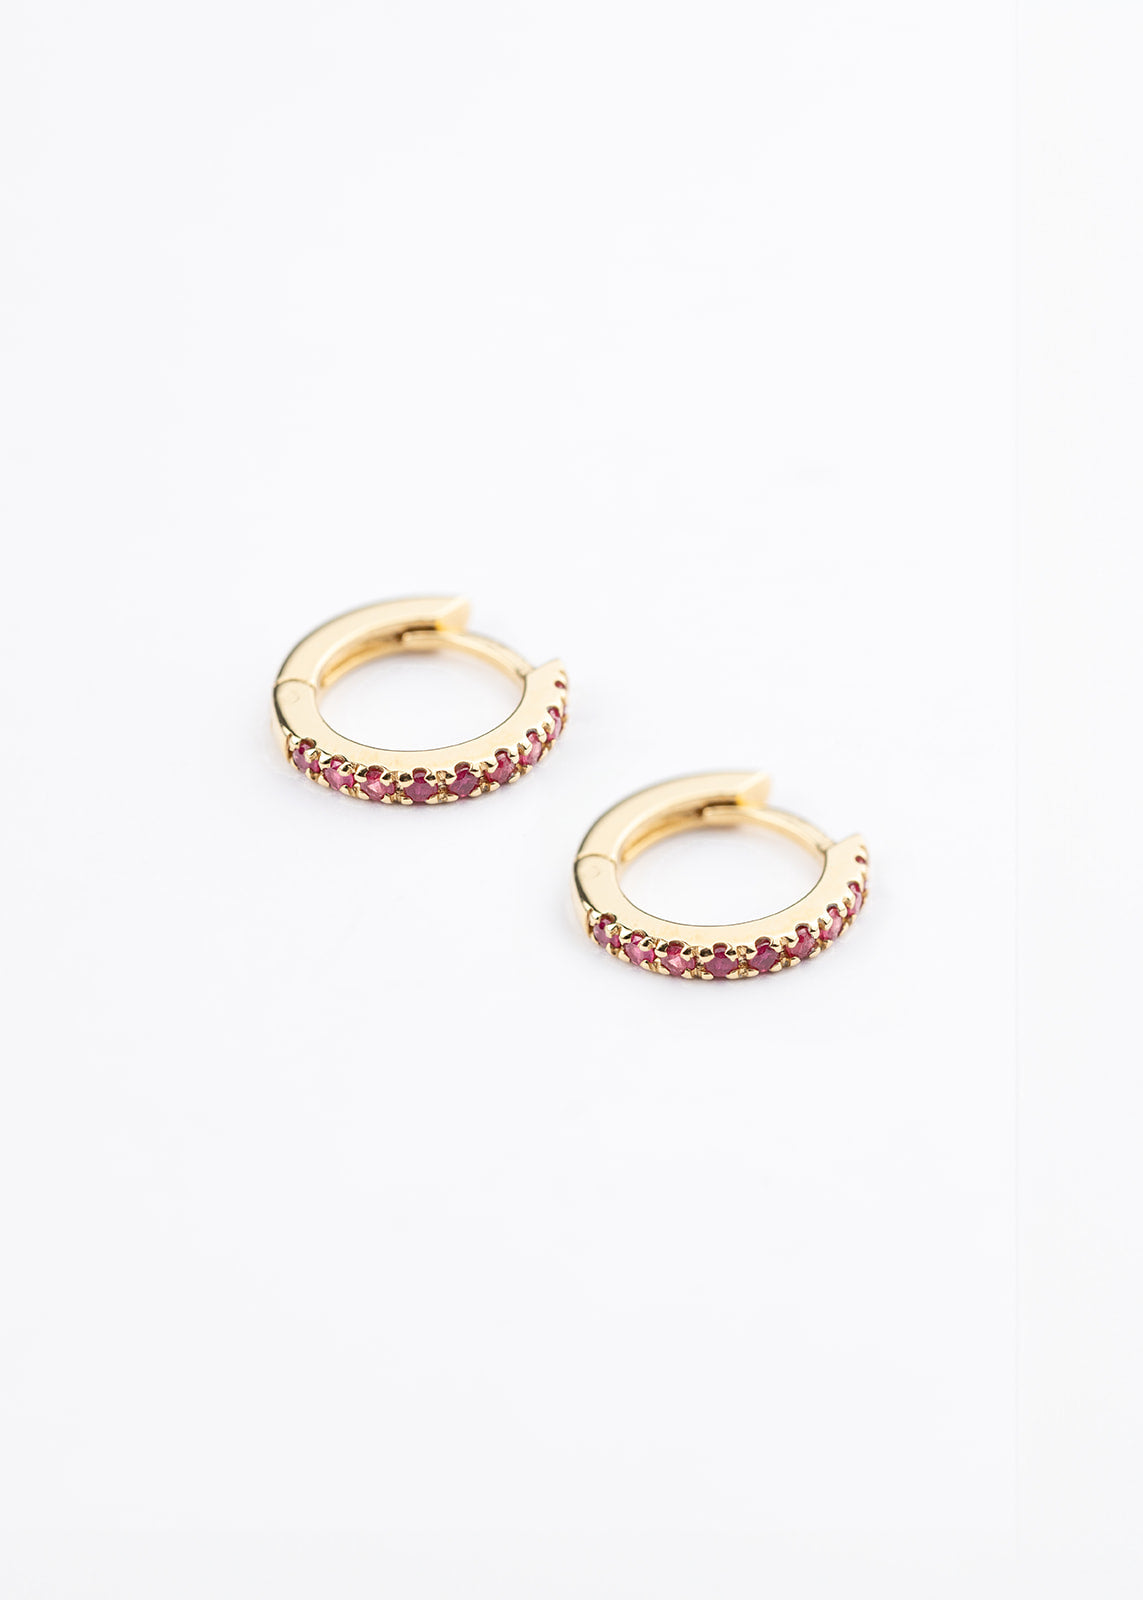 18kt Yellow Gold Round Huggies with Rubies